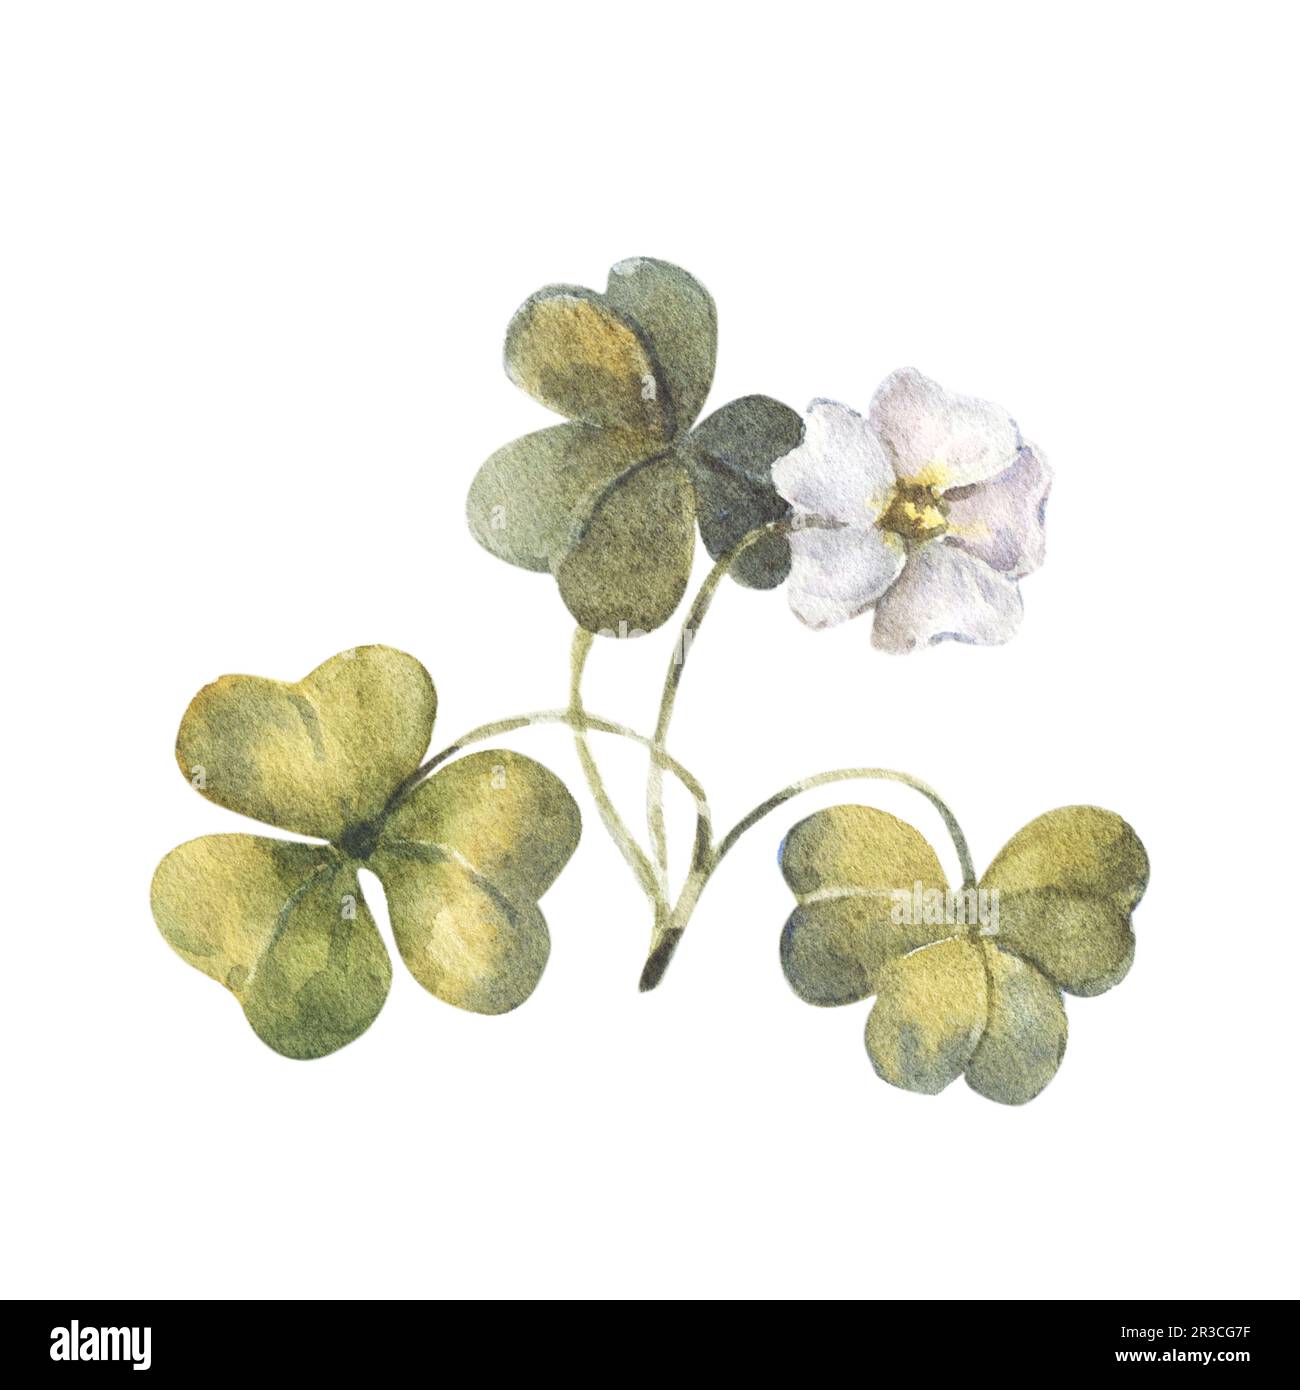 Watercolor illustration, forest oxalis isolated on a white background. Forest plant with three-lobed leaves and small white flowers. Stock Photo